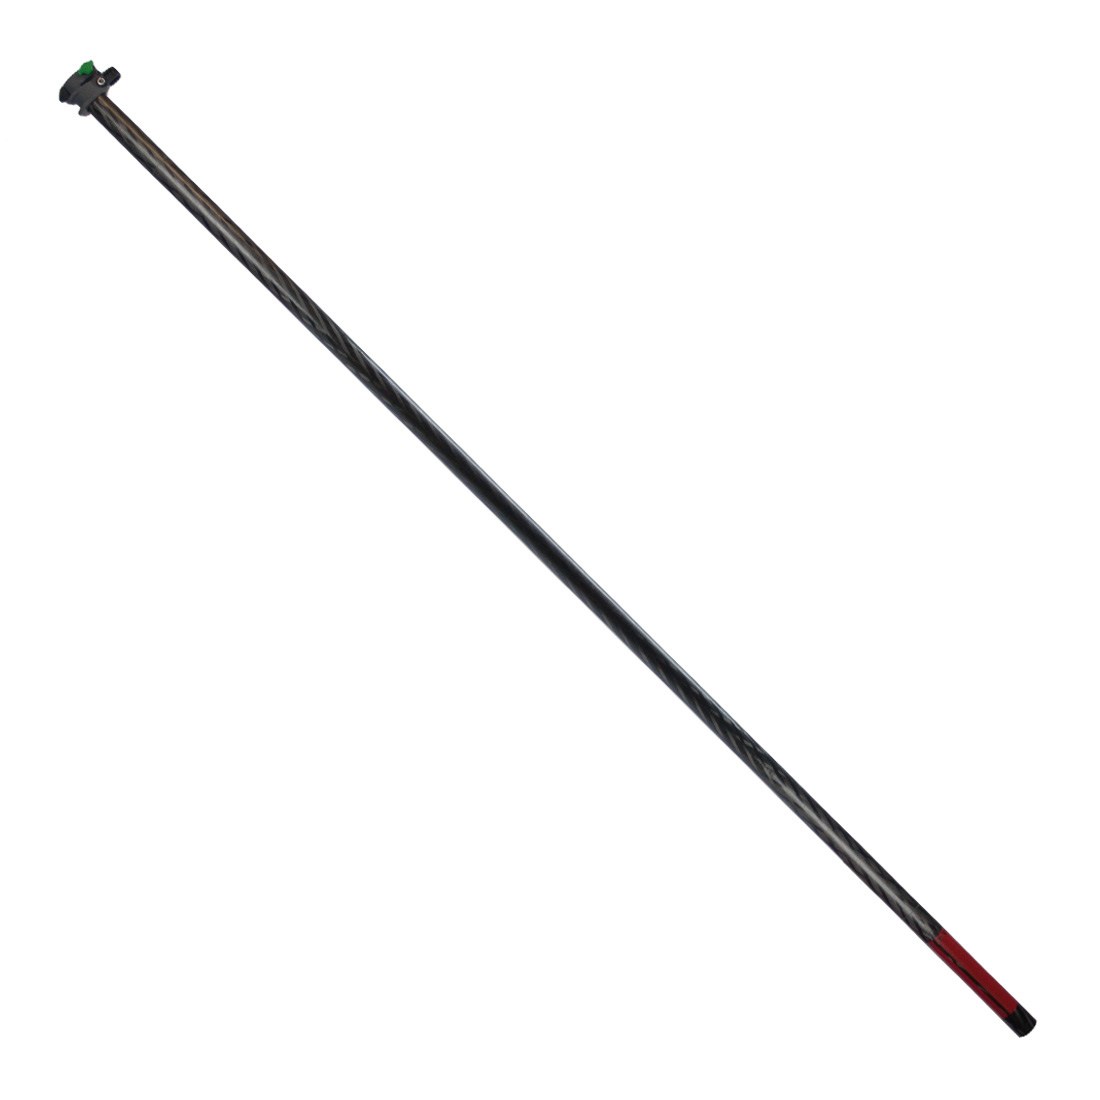 Unger-nLite-HiMod-Carbon-Master-Pole-Replacement-Section-Full-View